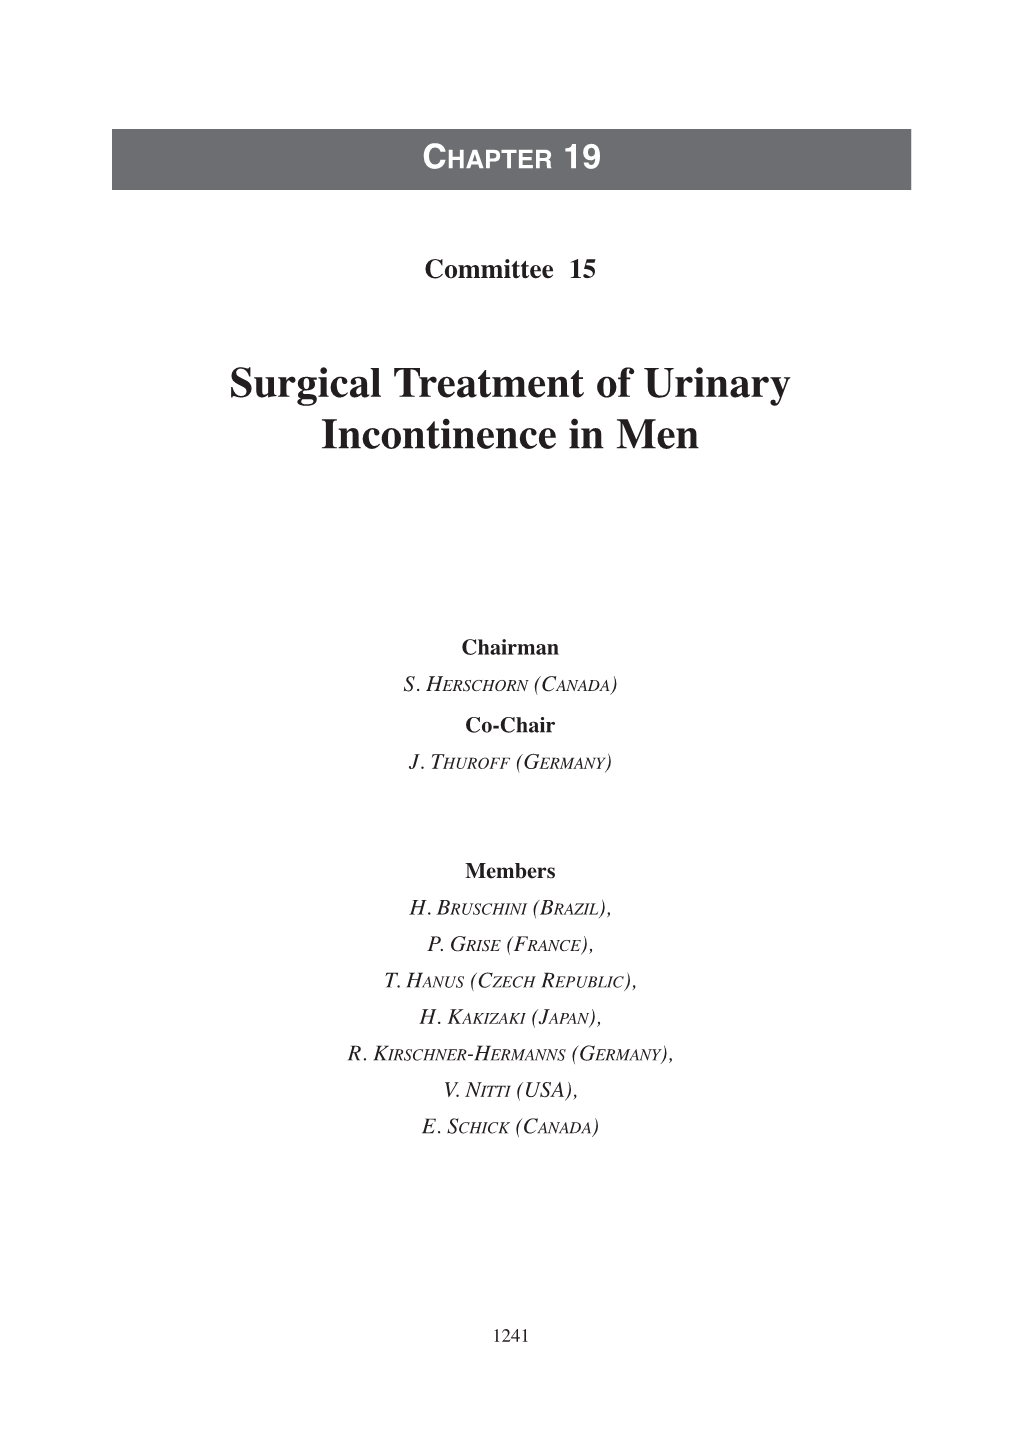 Surgical Treatment of Urinary Incontinence in Men